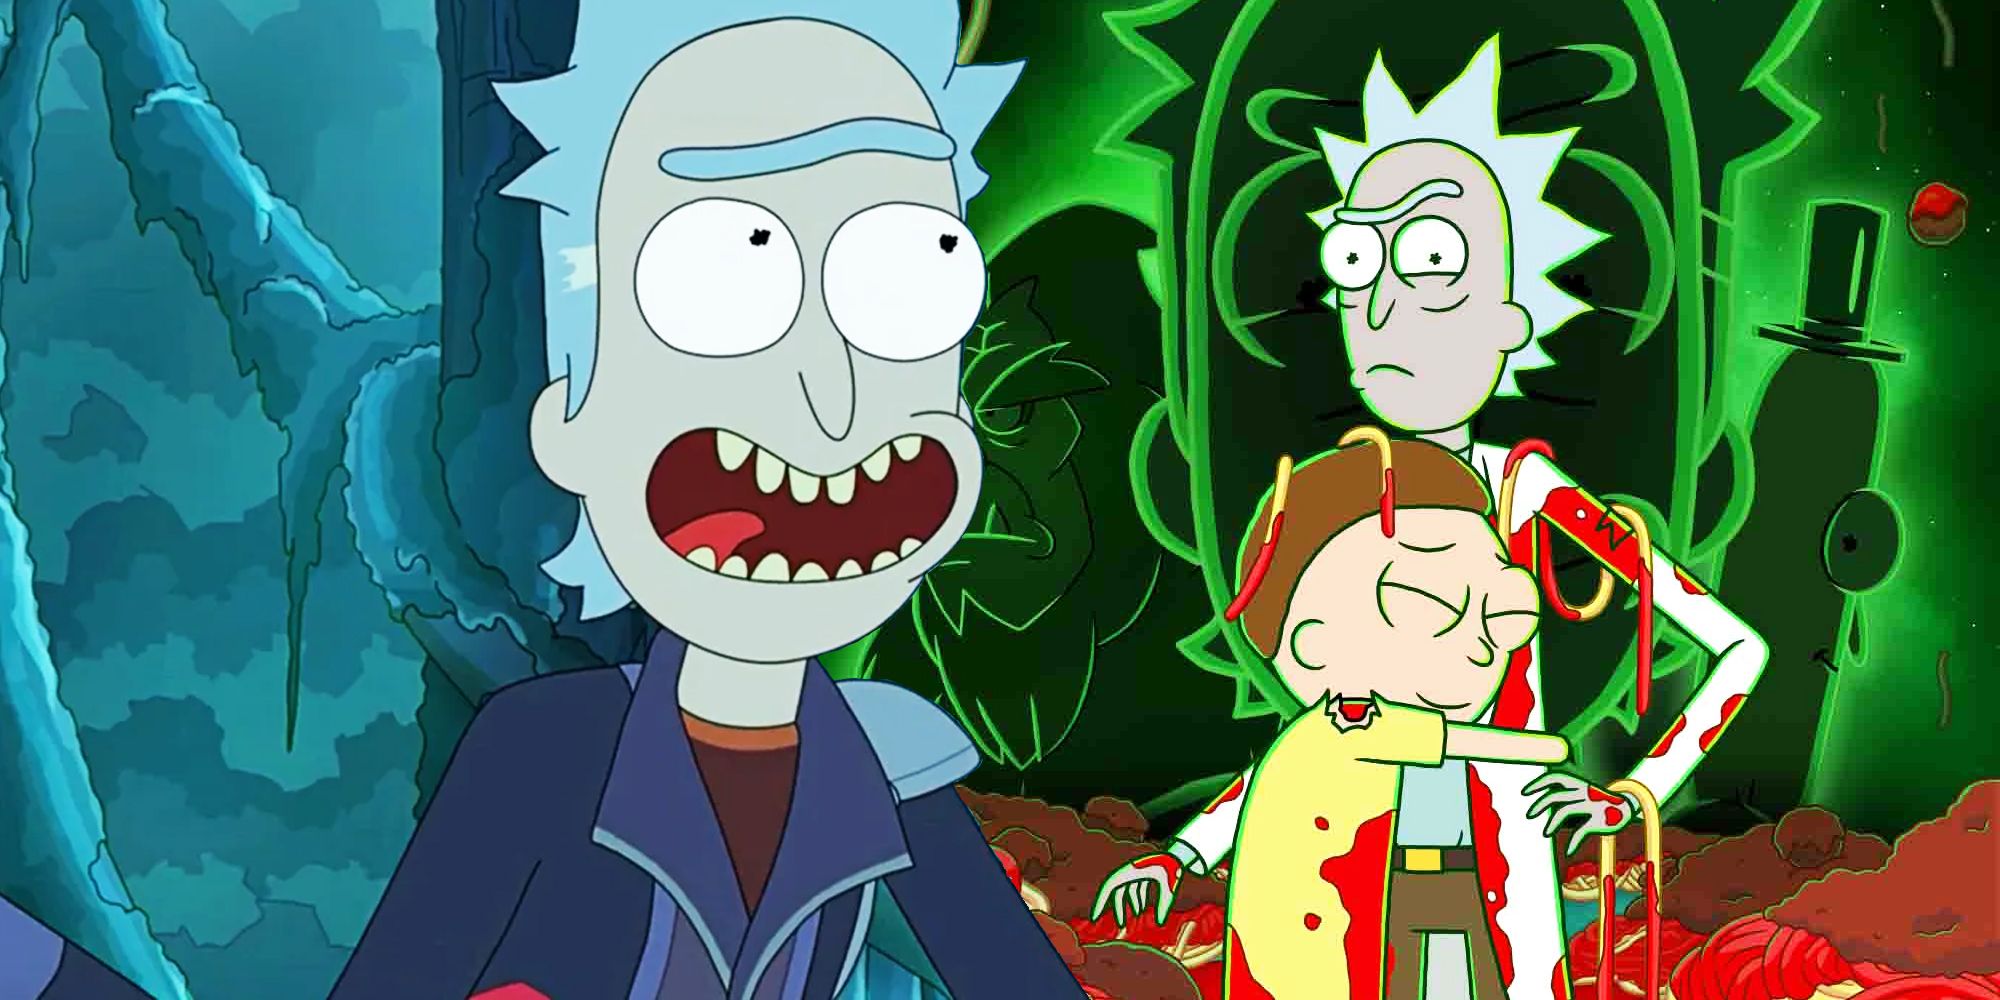 Rick And Morty Season 7 Is The Show's Most Divisive Yet (& That's A ...